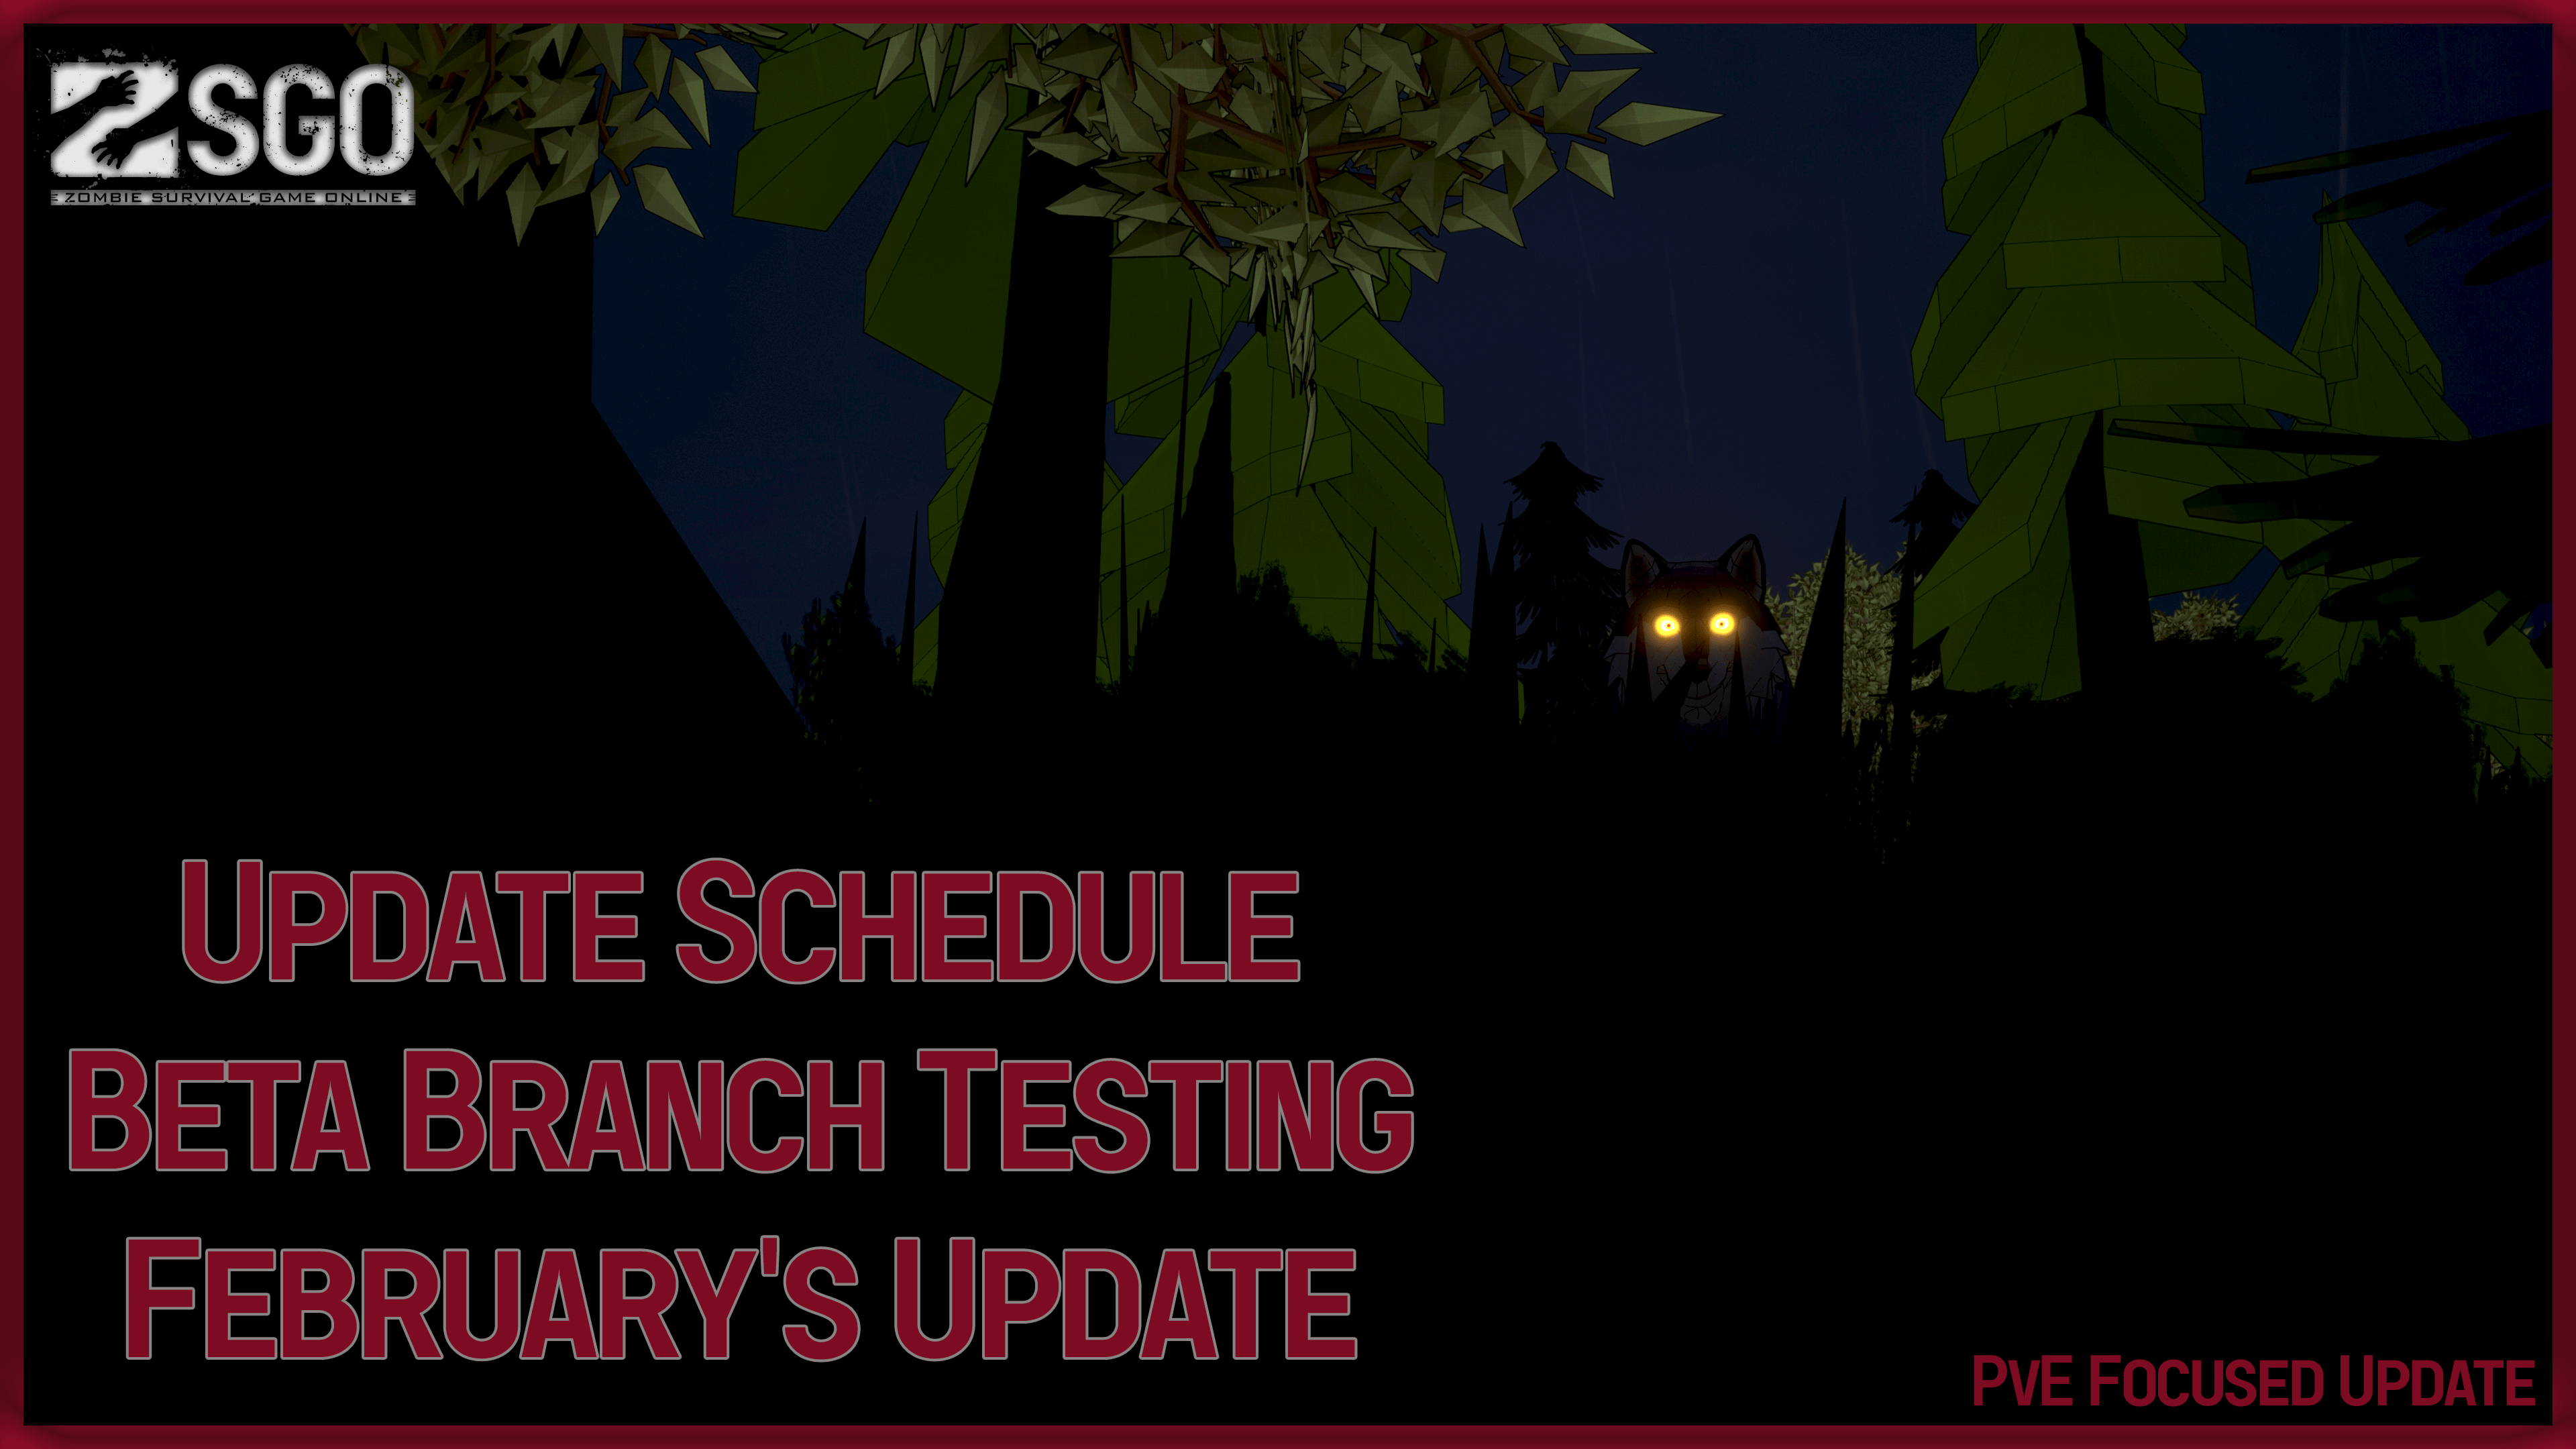 The update schedule thumbnail with a wolf lurking in the shadows.